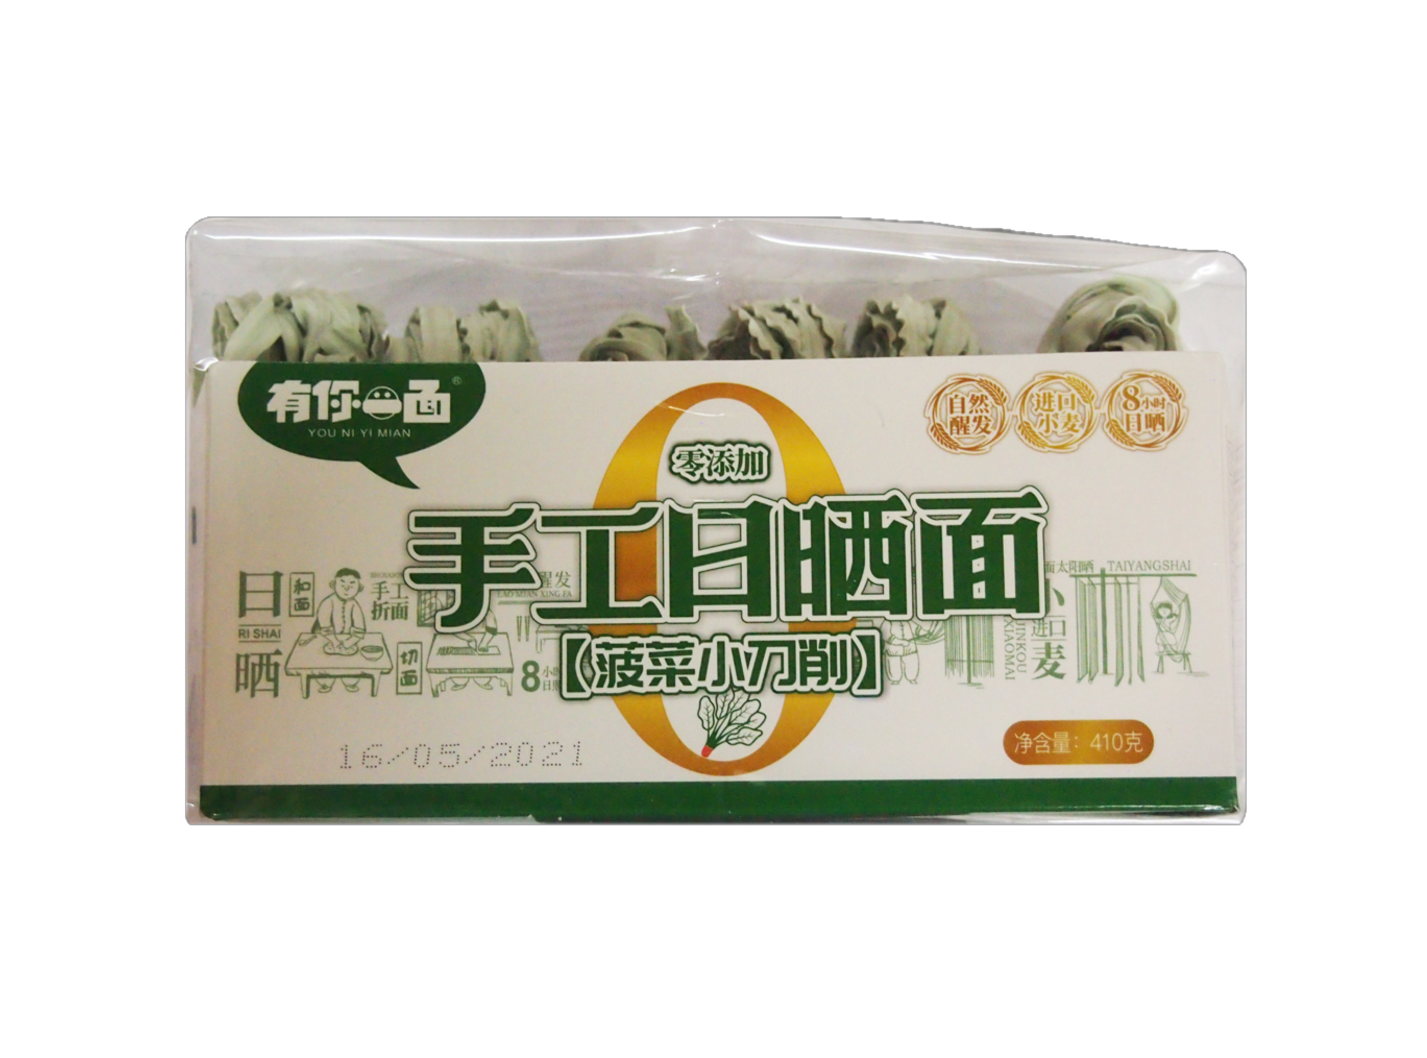 You Ni Yi Mian  Dried sliced noodle spinach flavour (徽记油泥一面菠菜切面)